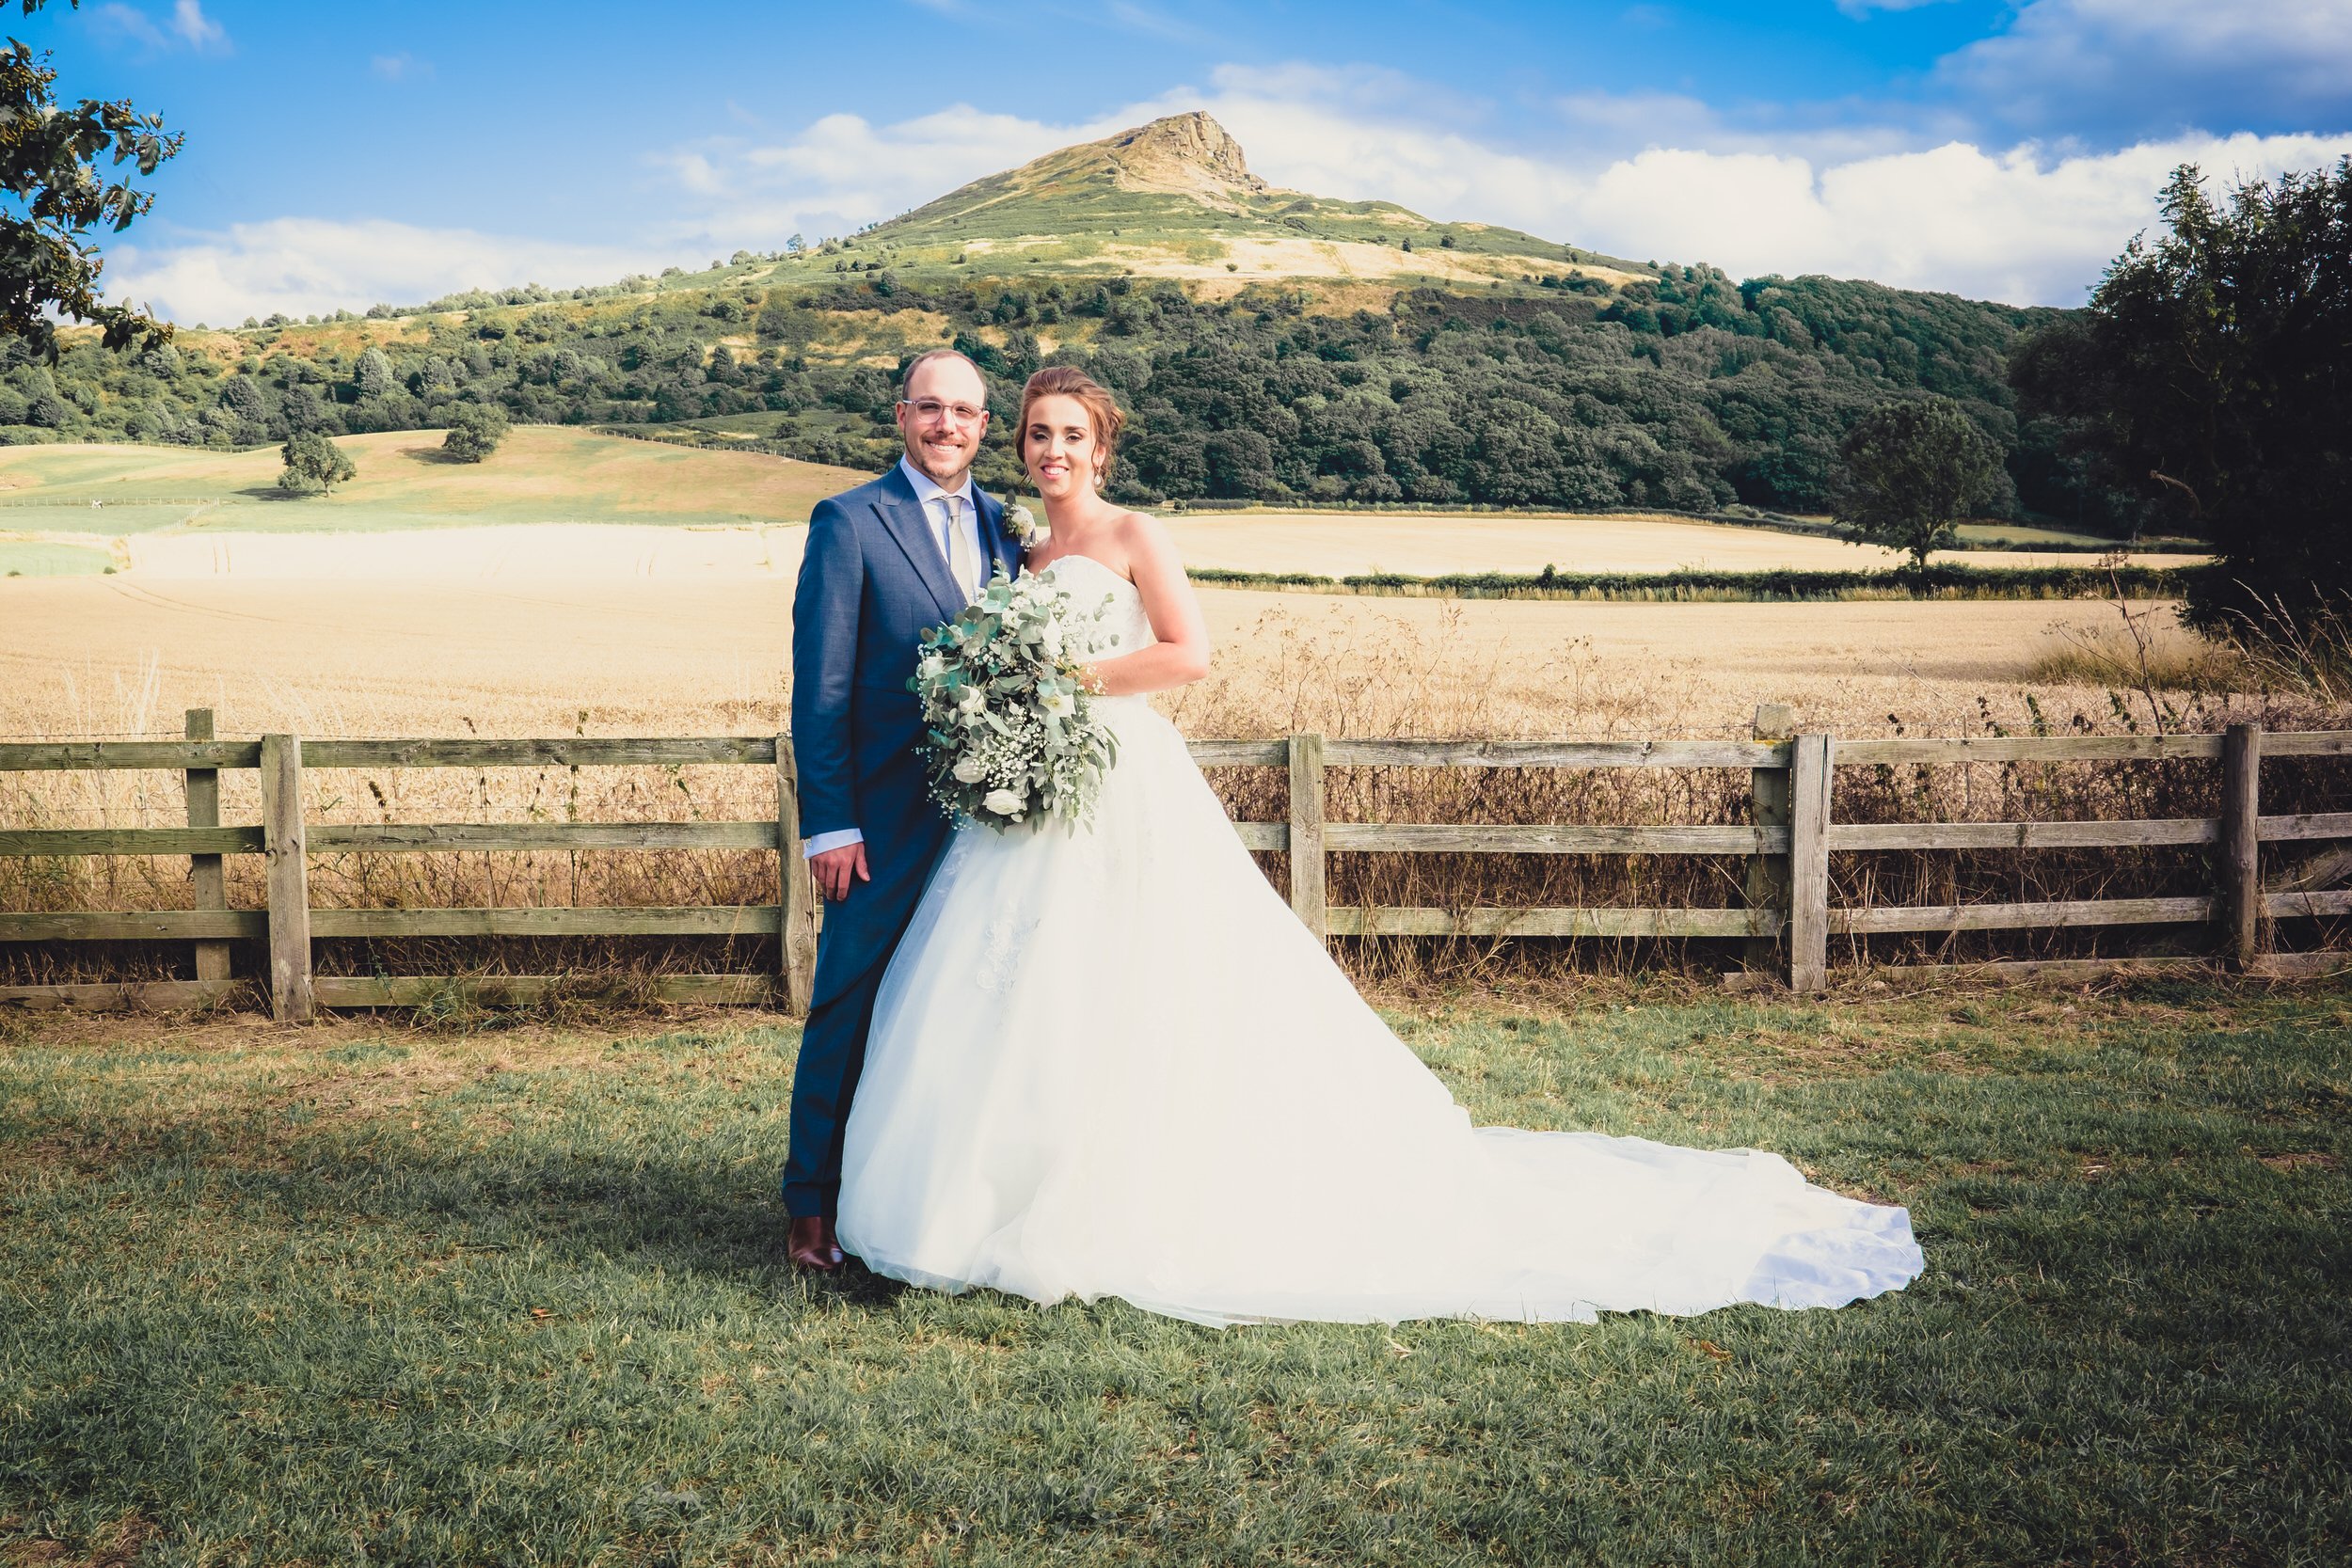 Bride and groom standing in front of roseberry topping | taylor wedding | wedding photography glasgow.jpg